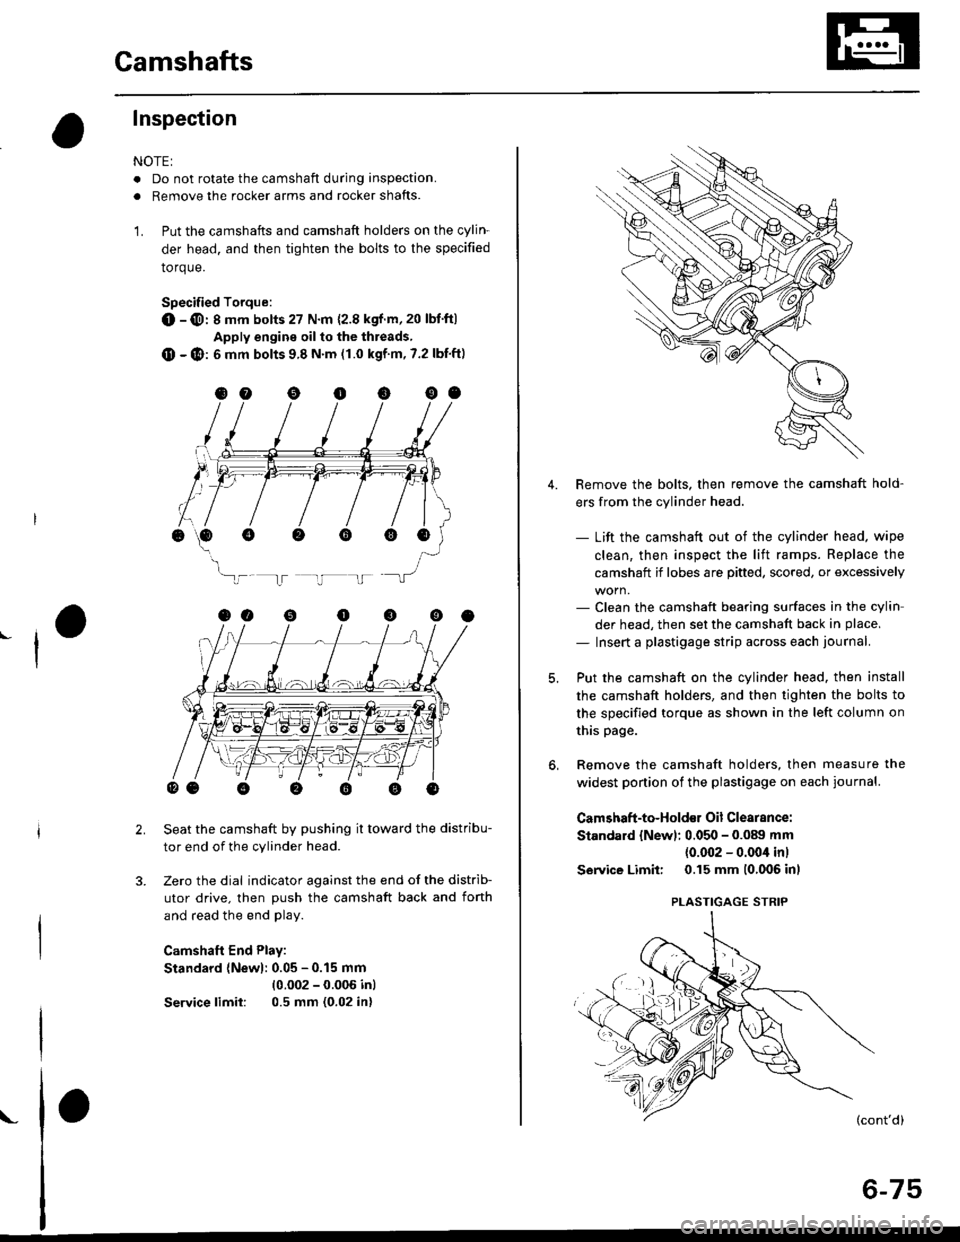 HONDA CIVIC 1997 6.G Workshop Manual Camshafts
Inspection
NOTE:
. Do not rotate the camshaft during inspection.
. Removg the rocker arms and rocker shafts.
L Put the camshafts and camshaft holders on the cylin-
der head. and then tighte